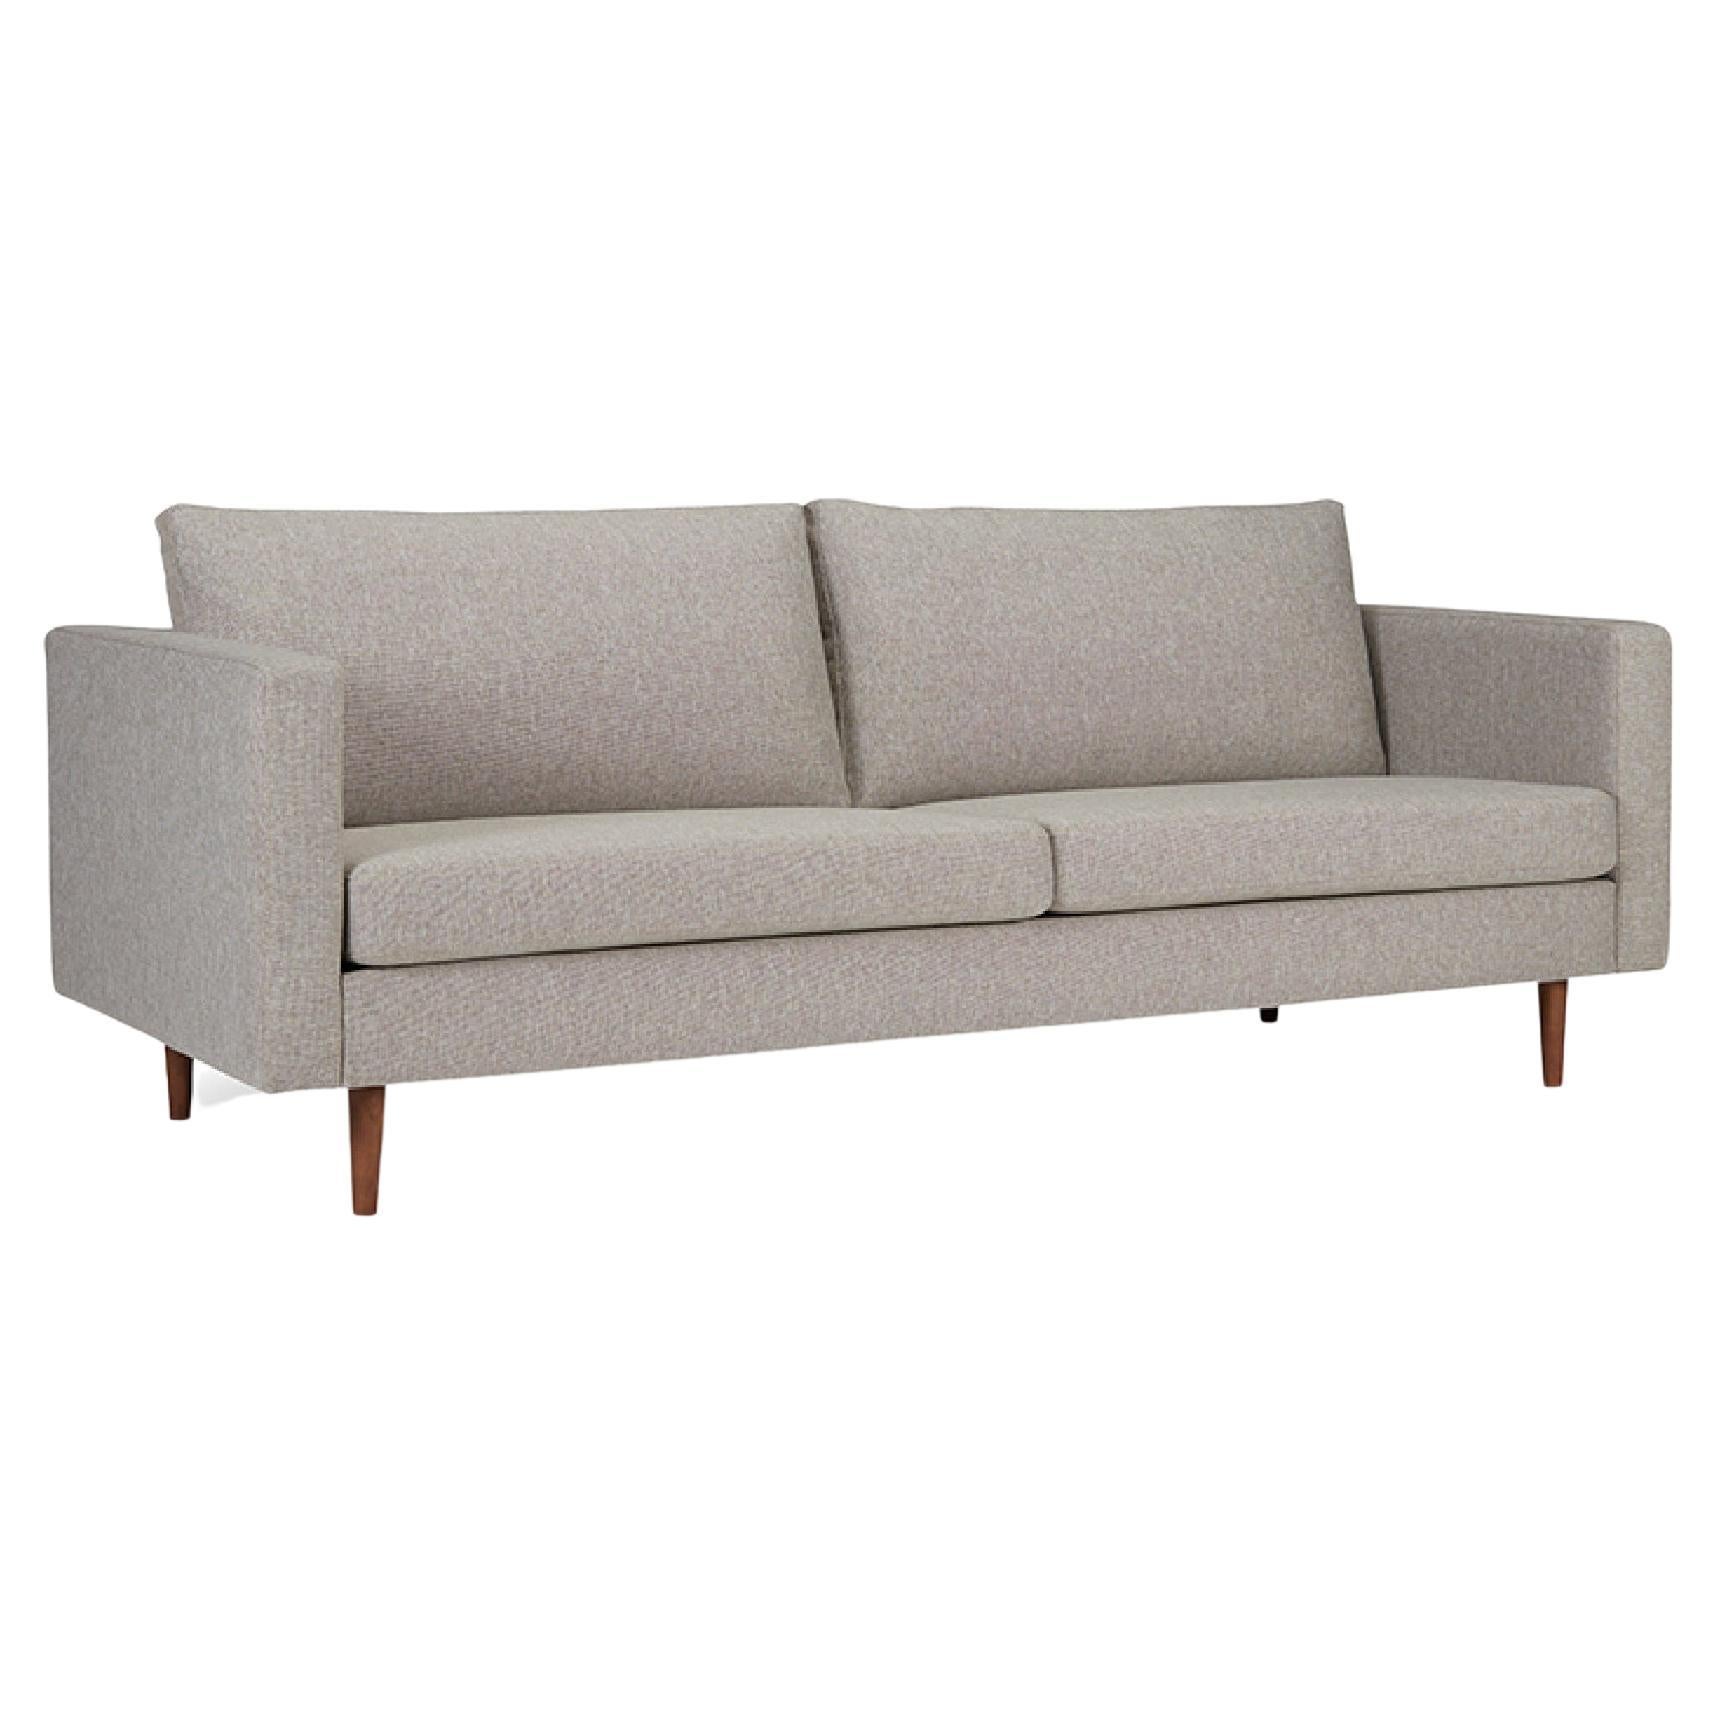  Hayche Clasico 3 Seater Sofa - Brown, UK, Made to Order